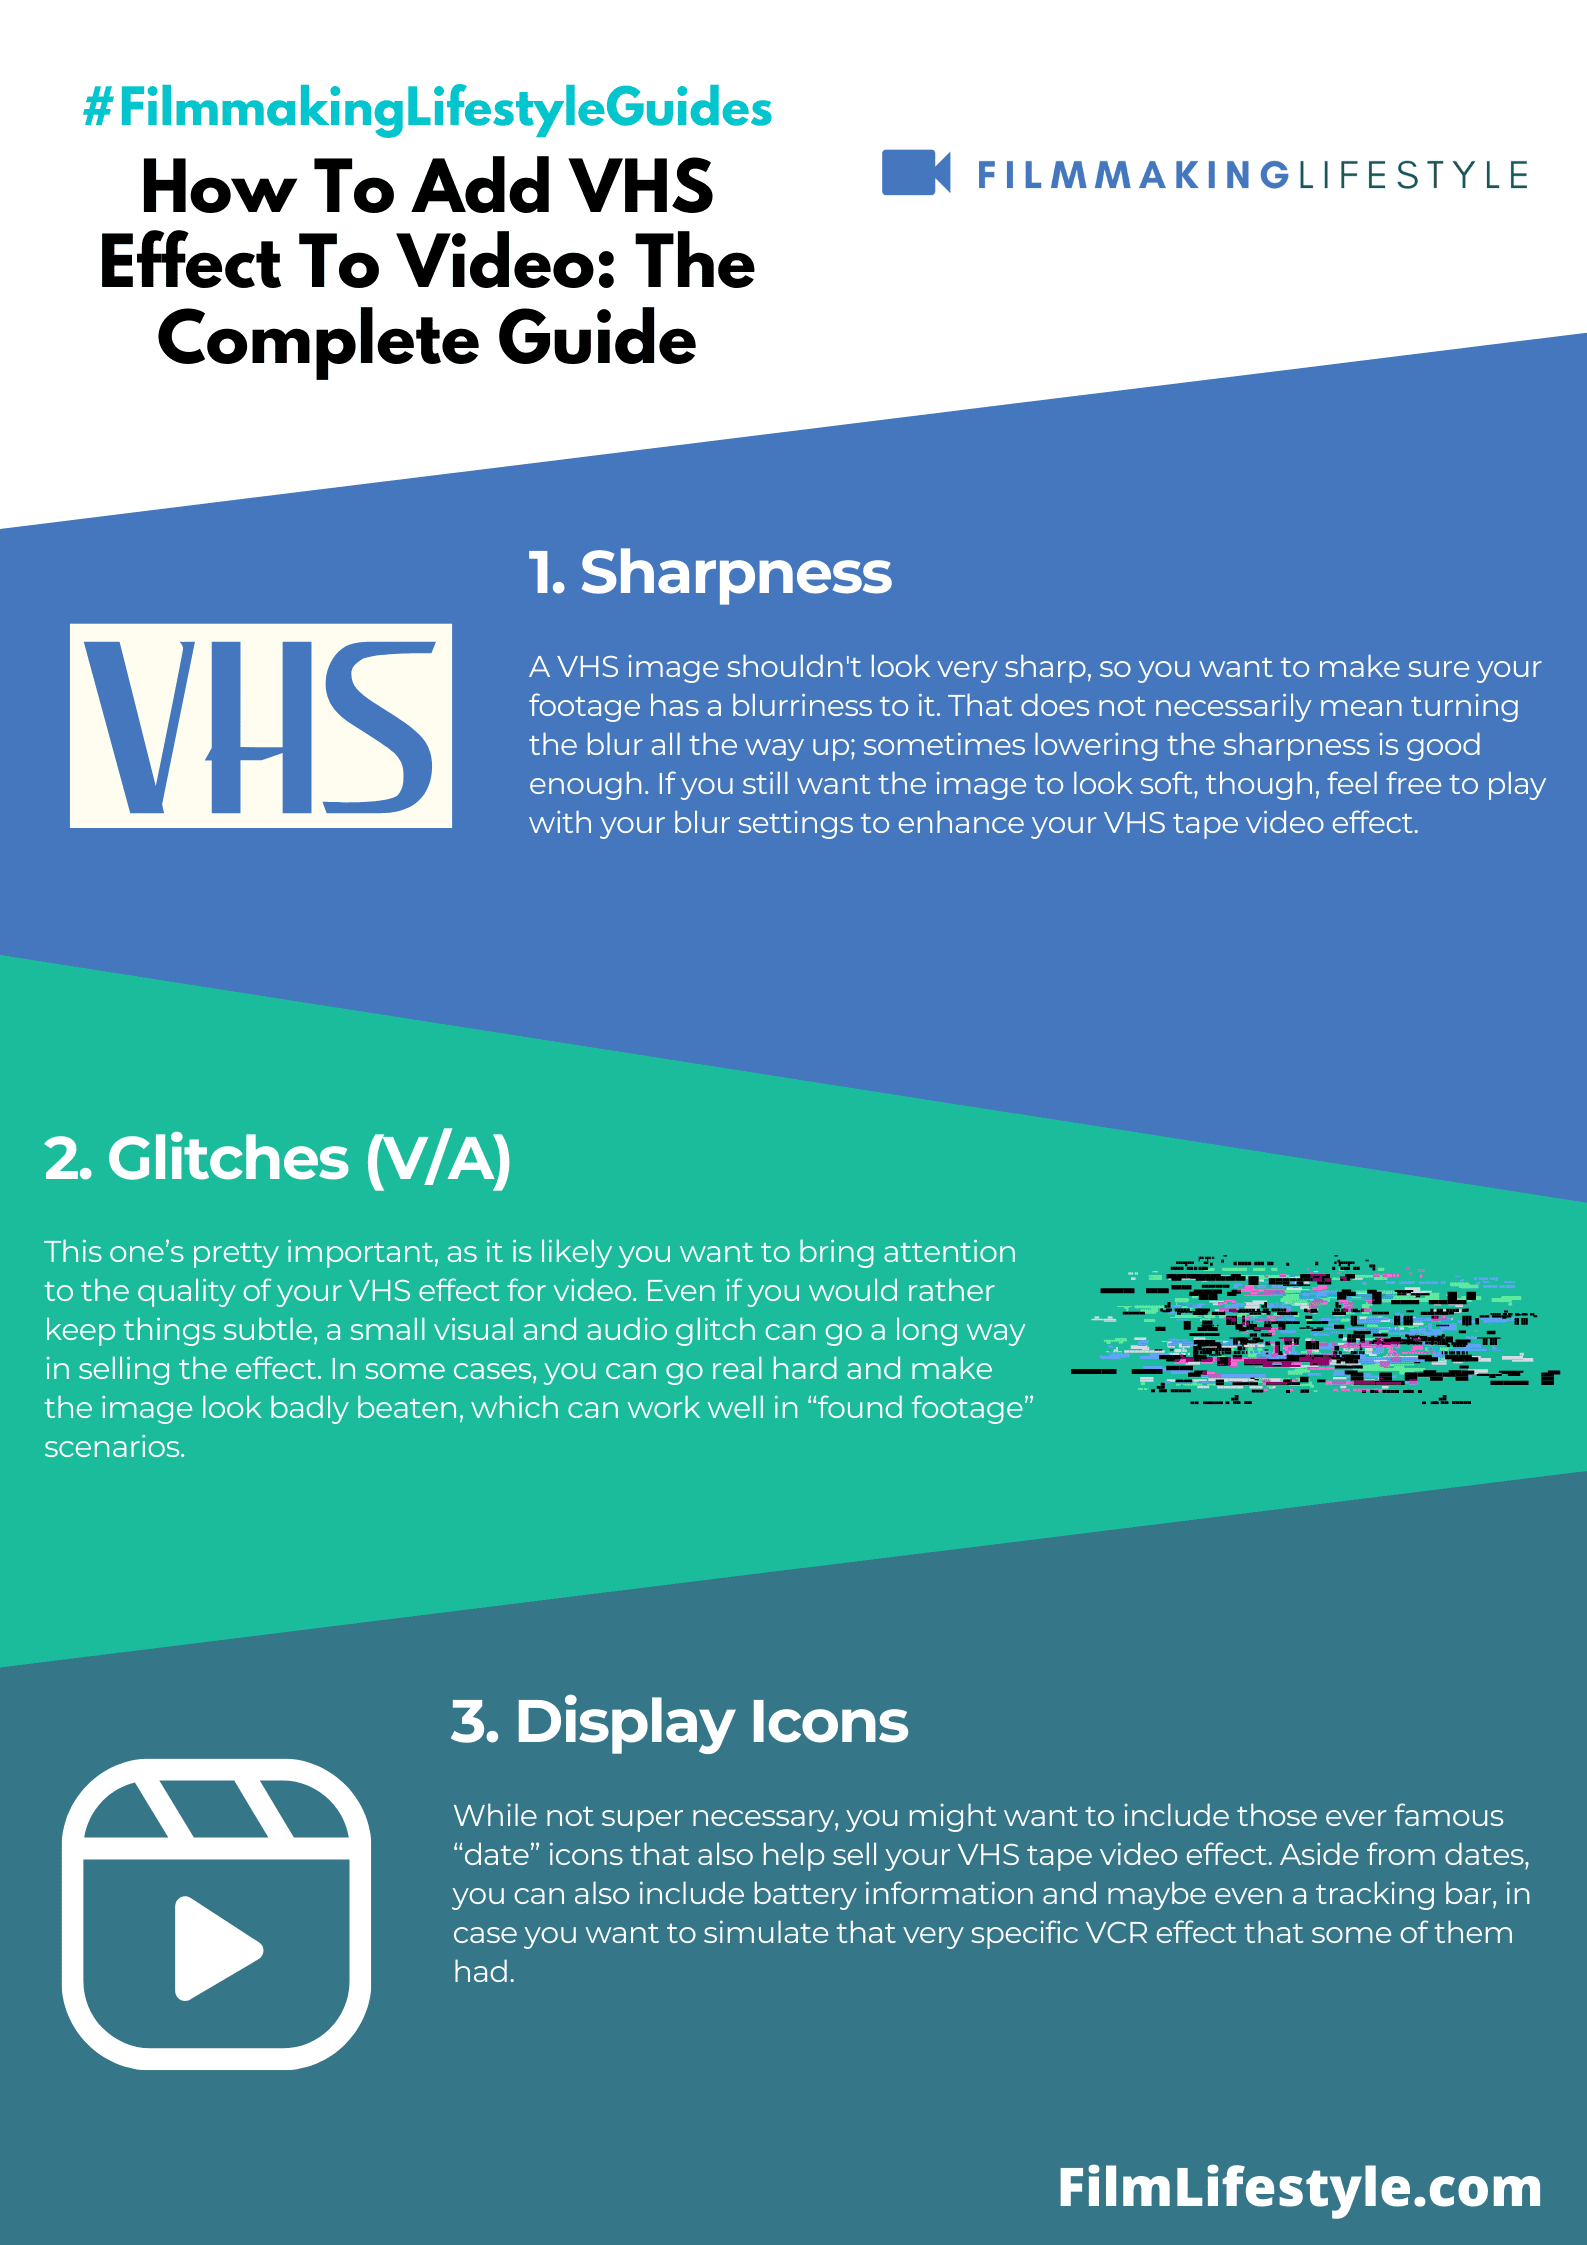 How To Add VHS Effect To Video